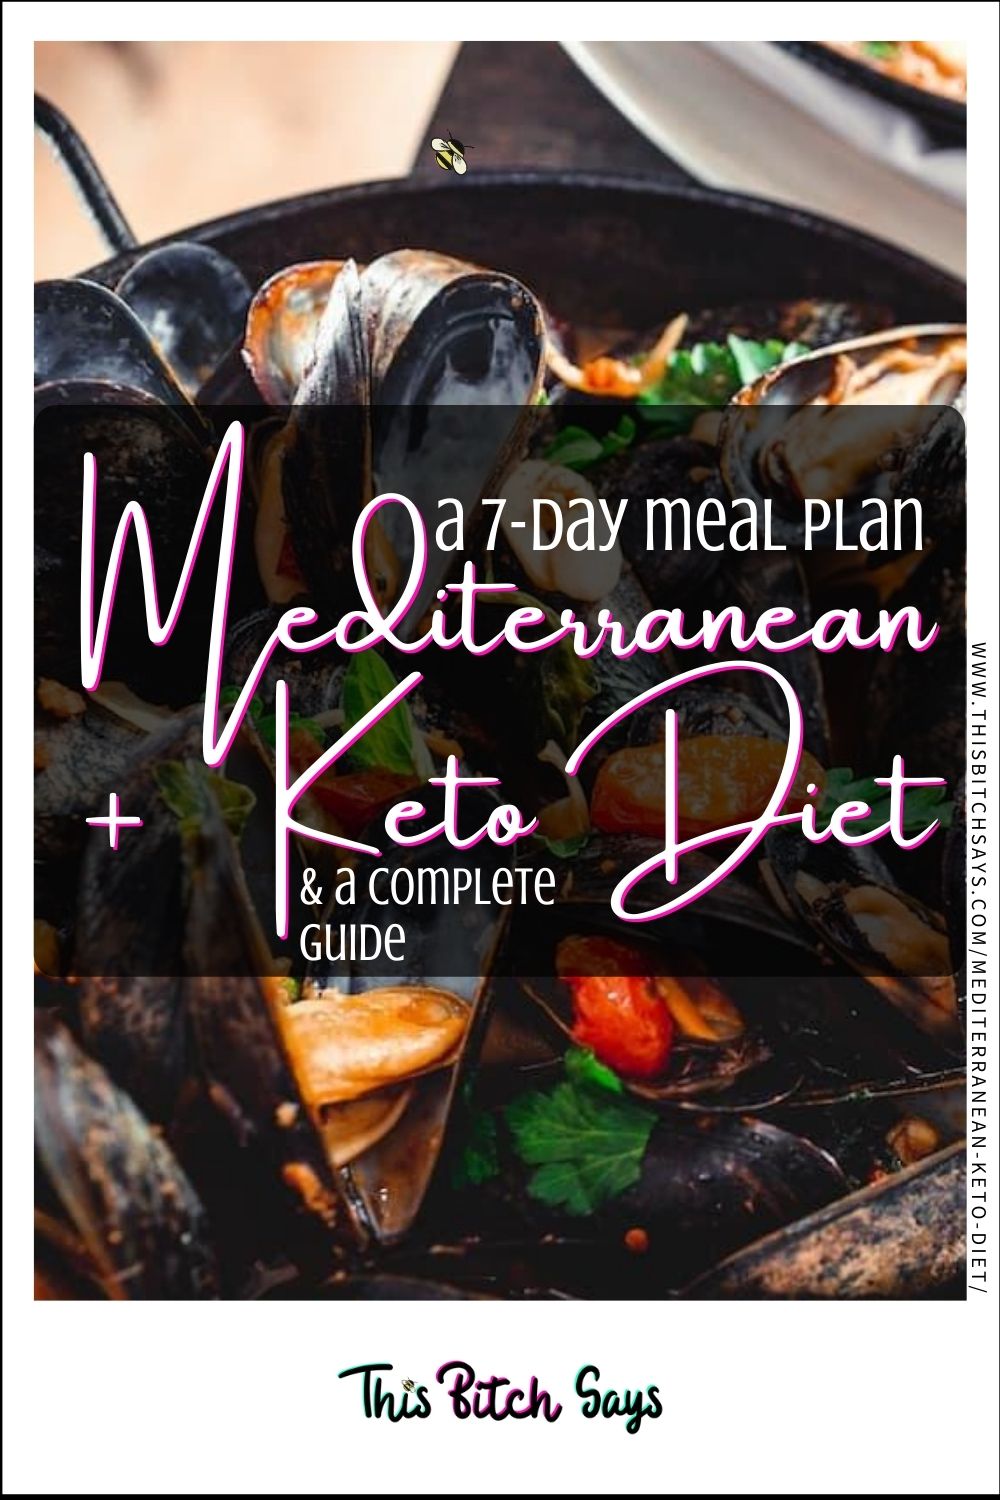 CLICK FOR: a 7-day meal plan mediterranean + keto diet & a complete guide